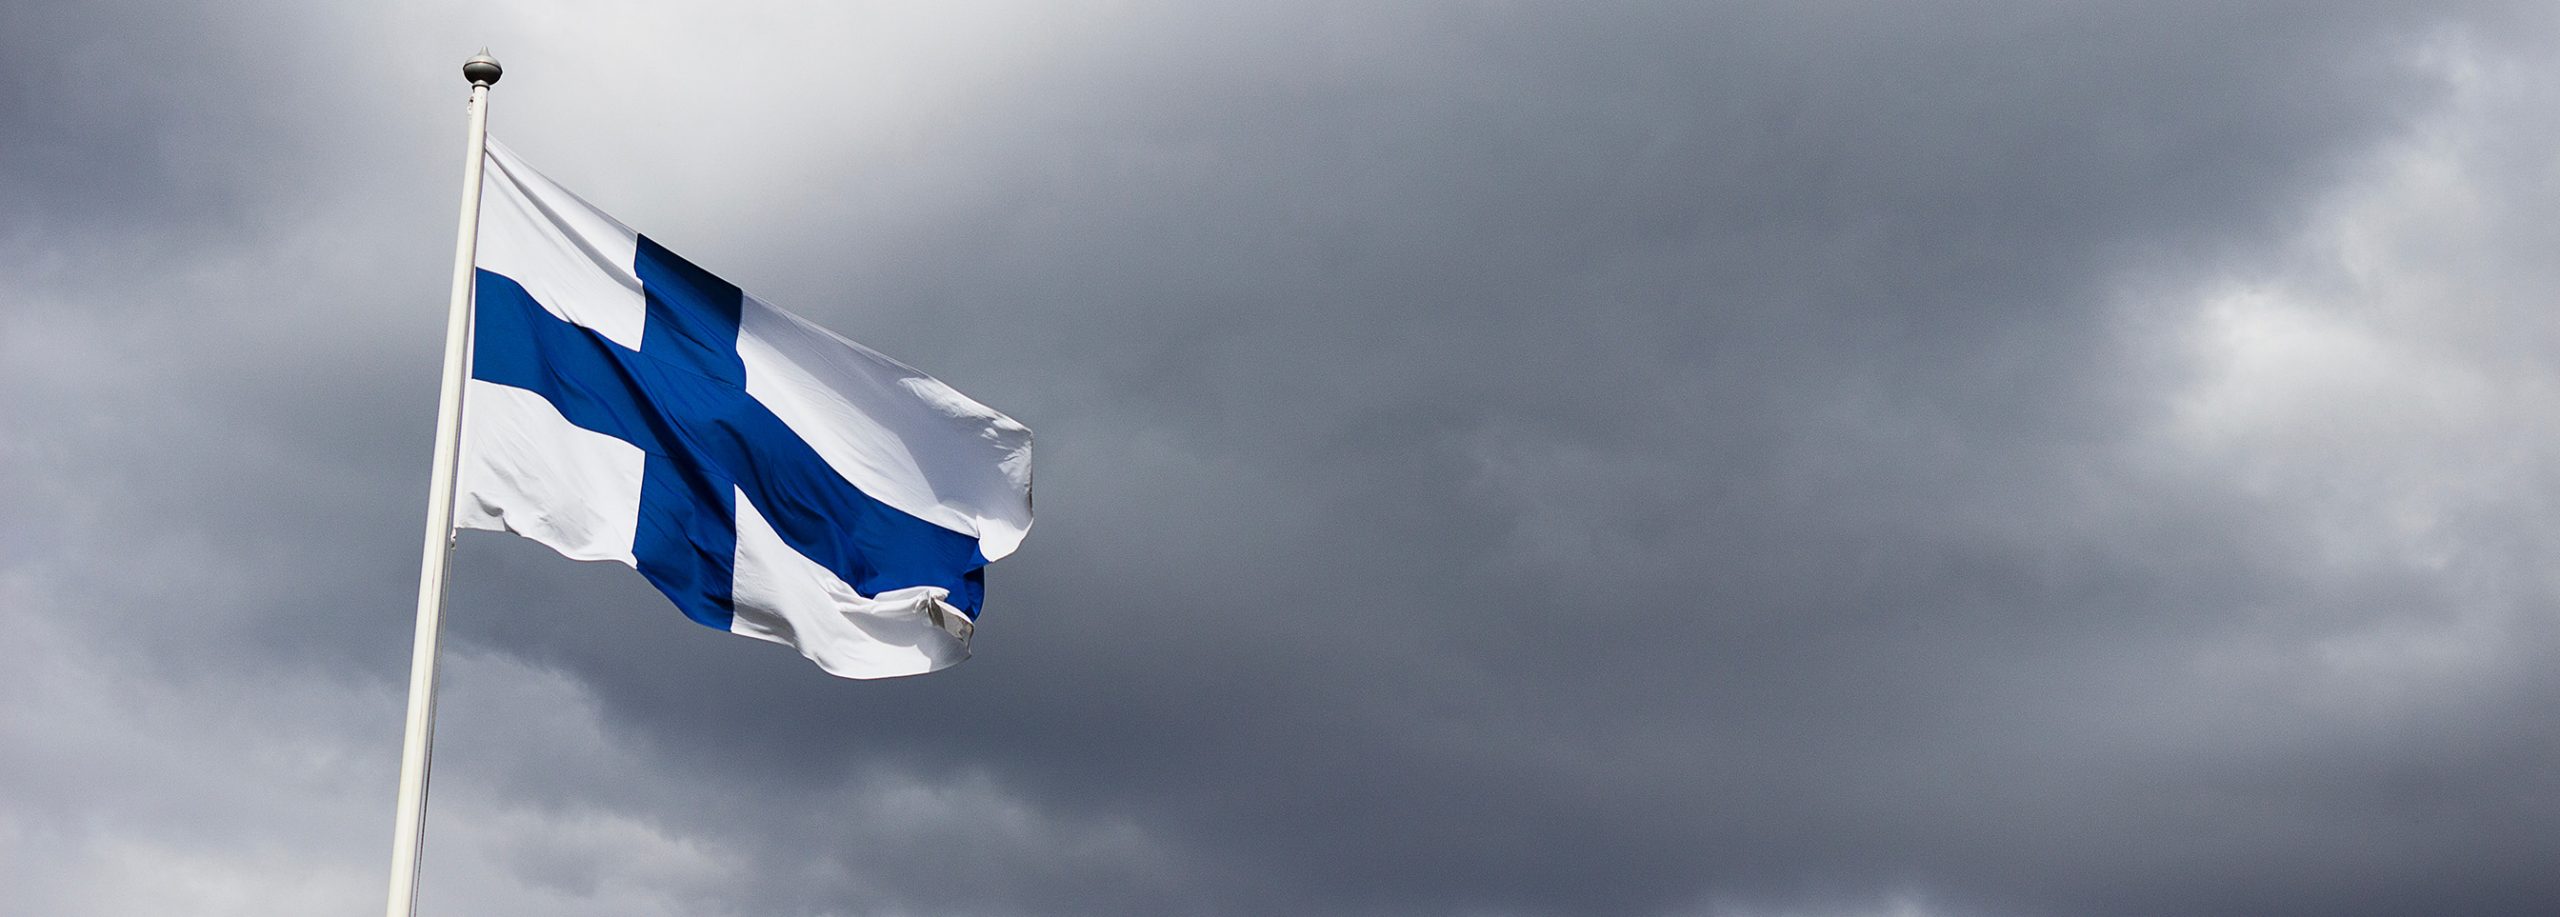 finland flag photography 997611 scaled 1